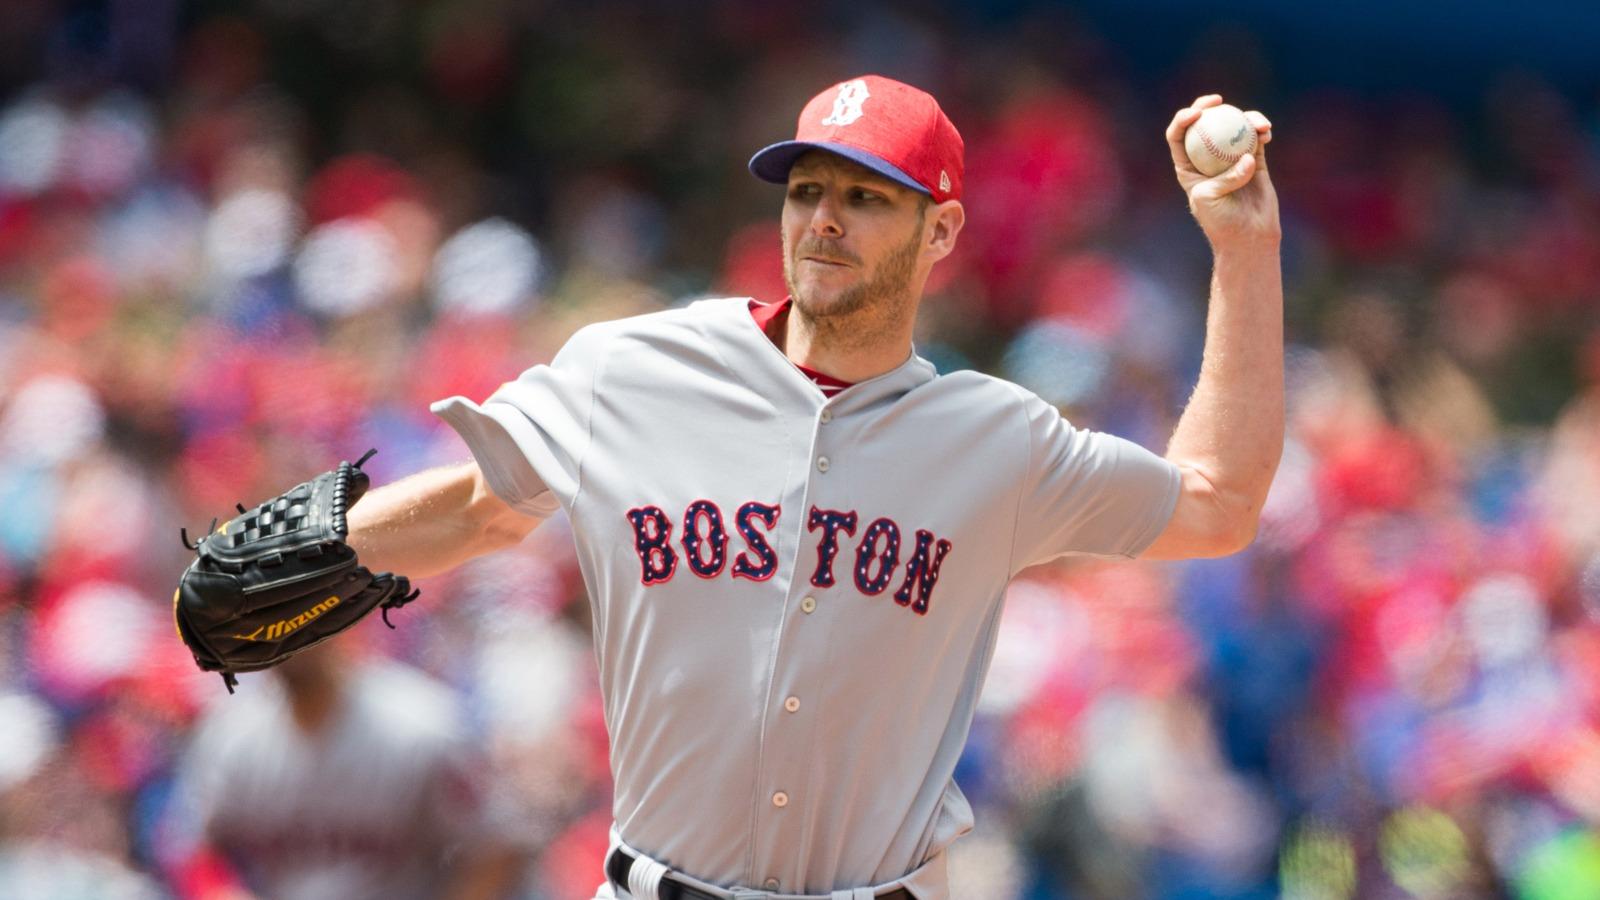 Awesome GIF shows why Chris Sale is so tough to hit